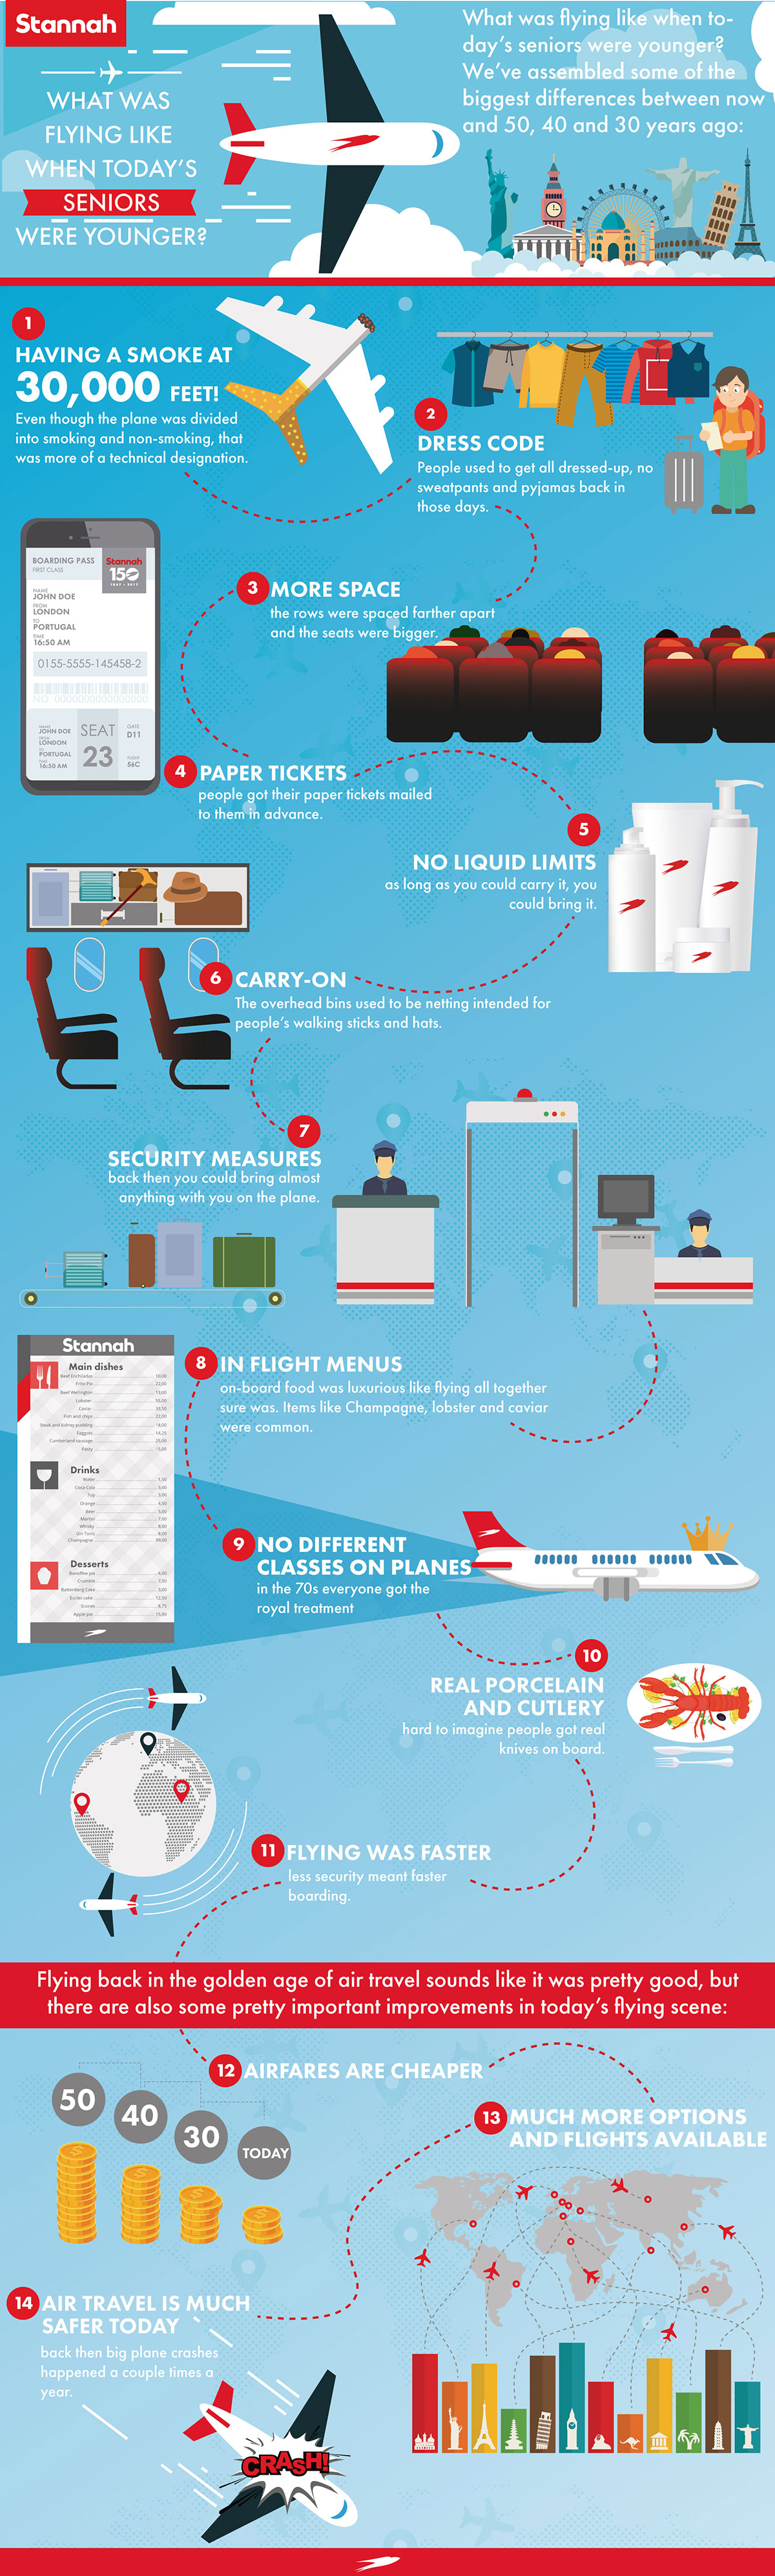 Infographic about senior air travel 